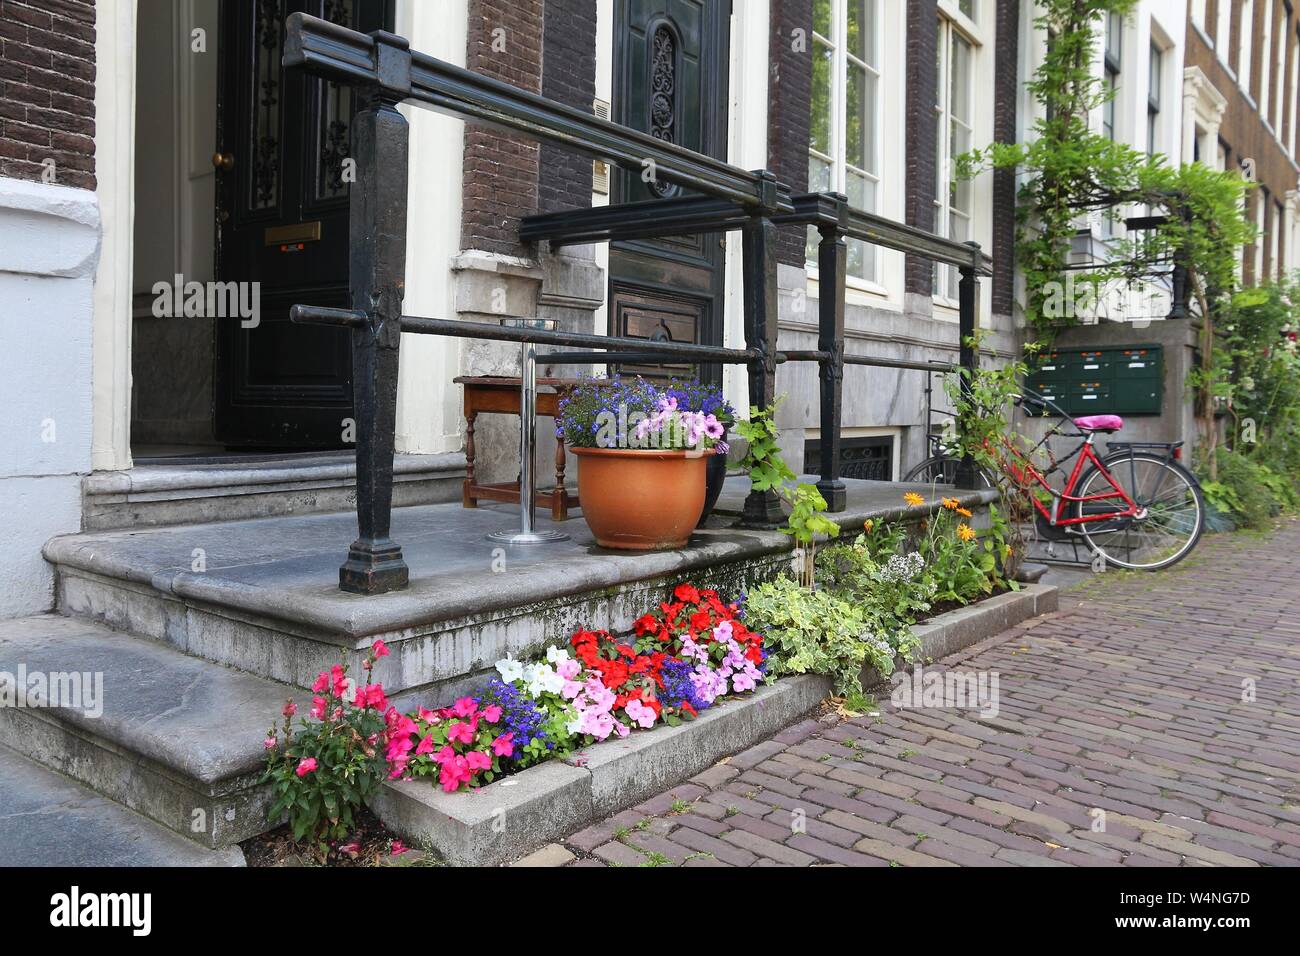 Amsterdam residential street - Keizersgracht canal buildings. Netherlands rowhouse. Stock Photo